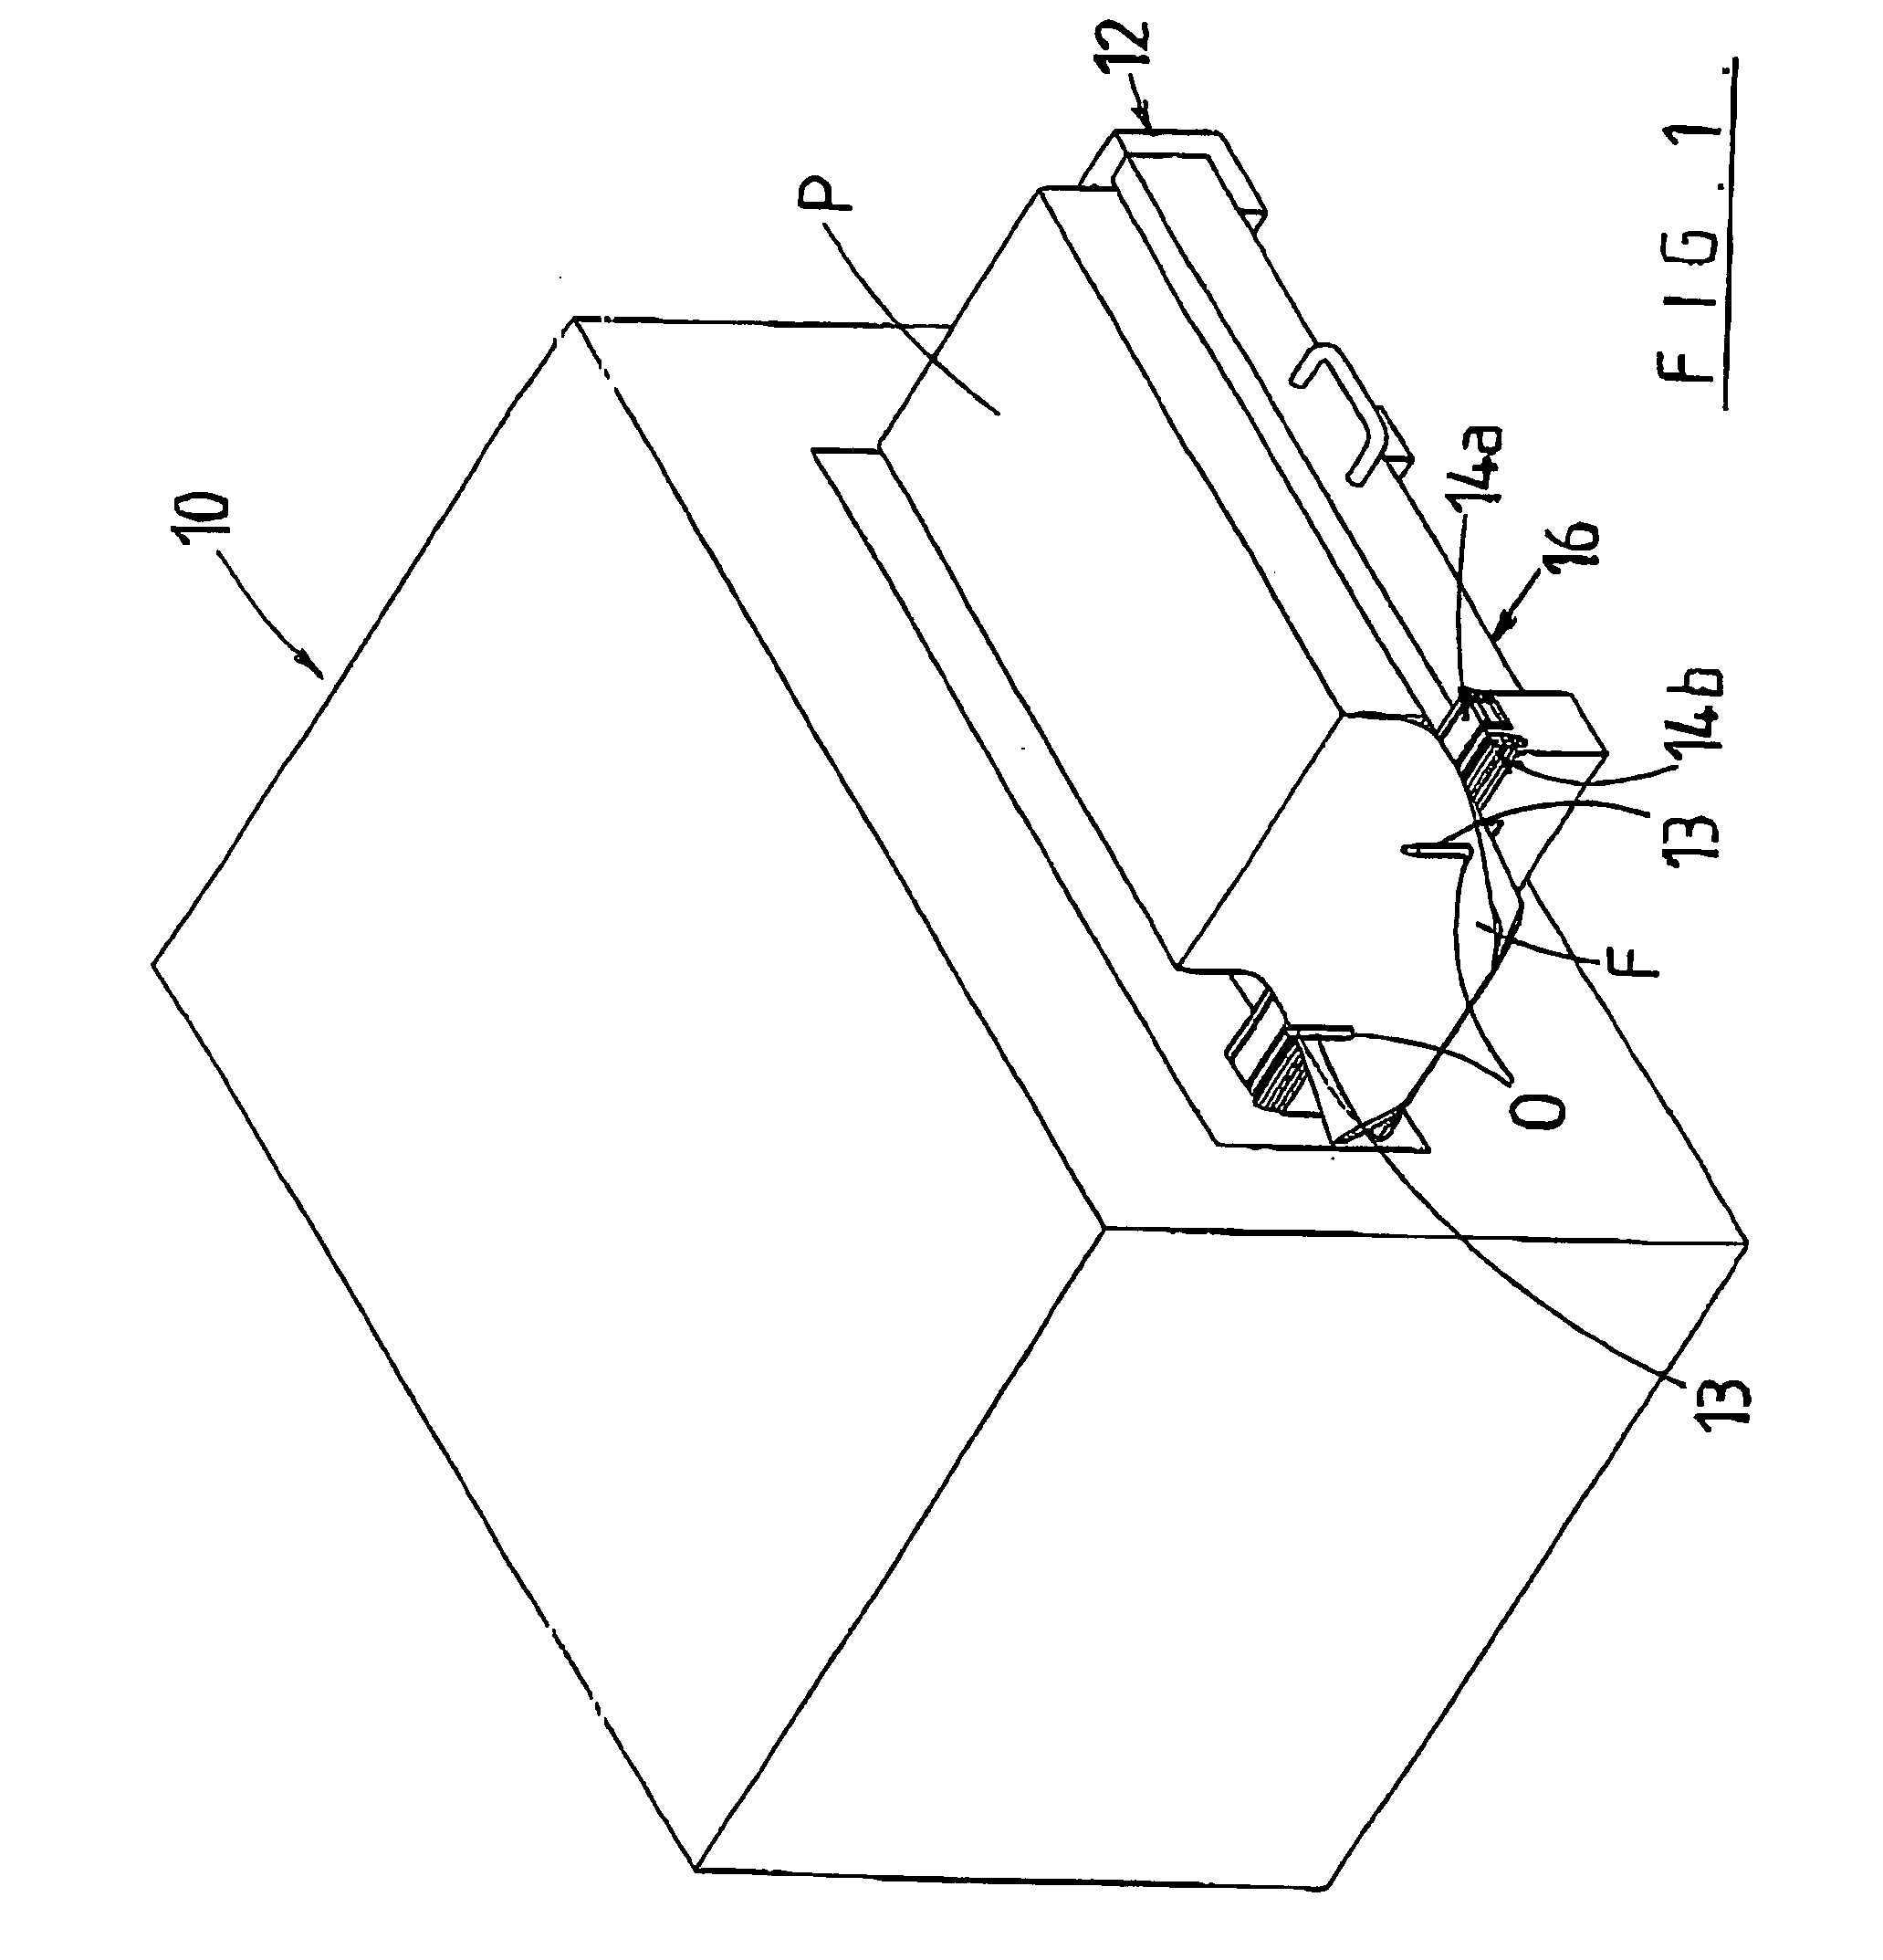 Method and Apparatus for Sterilization